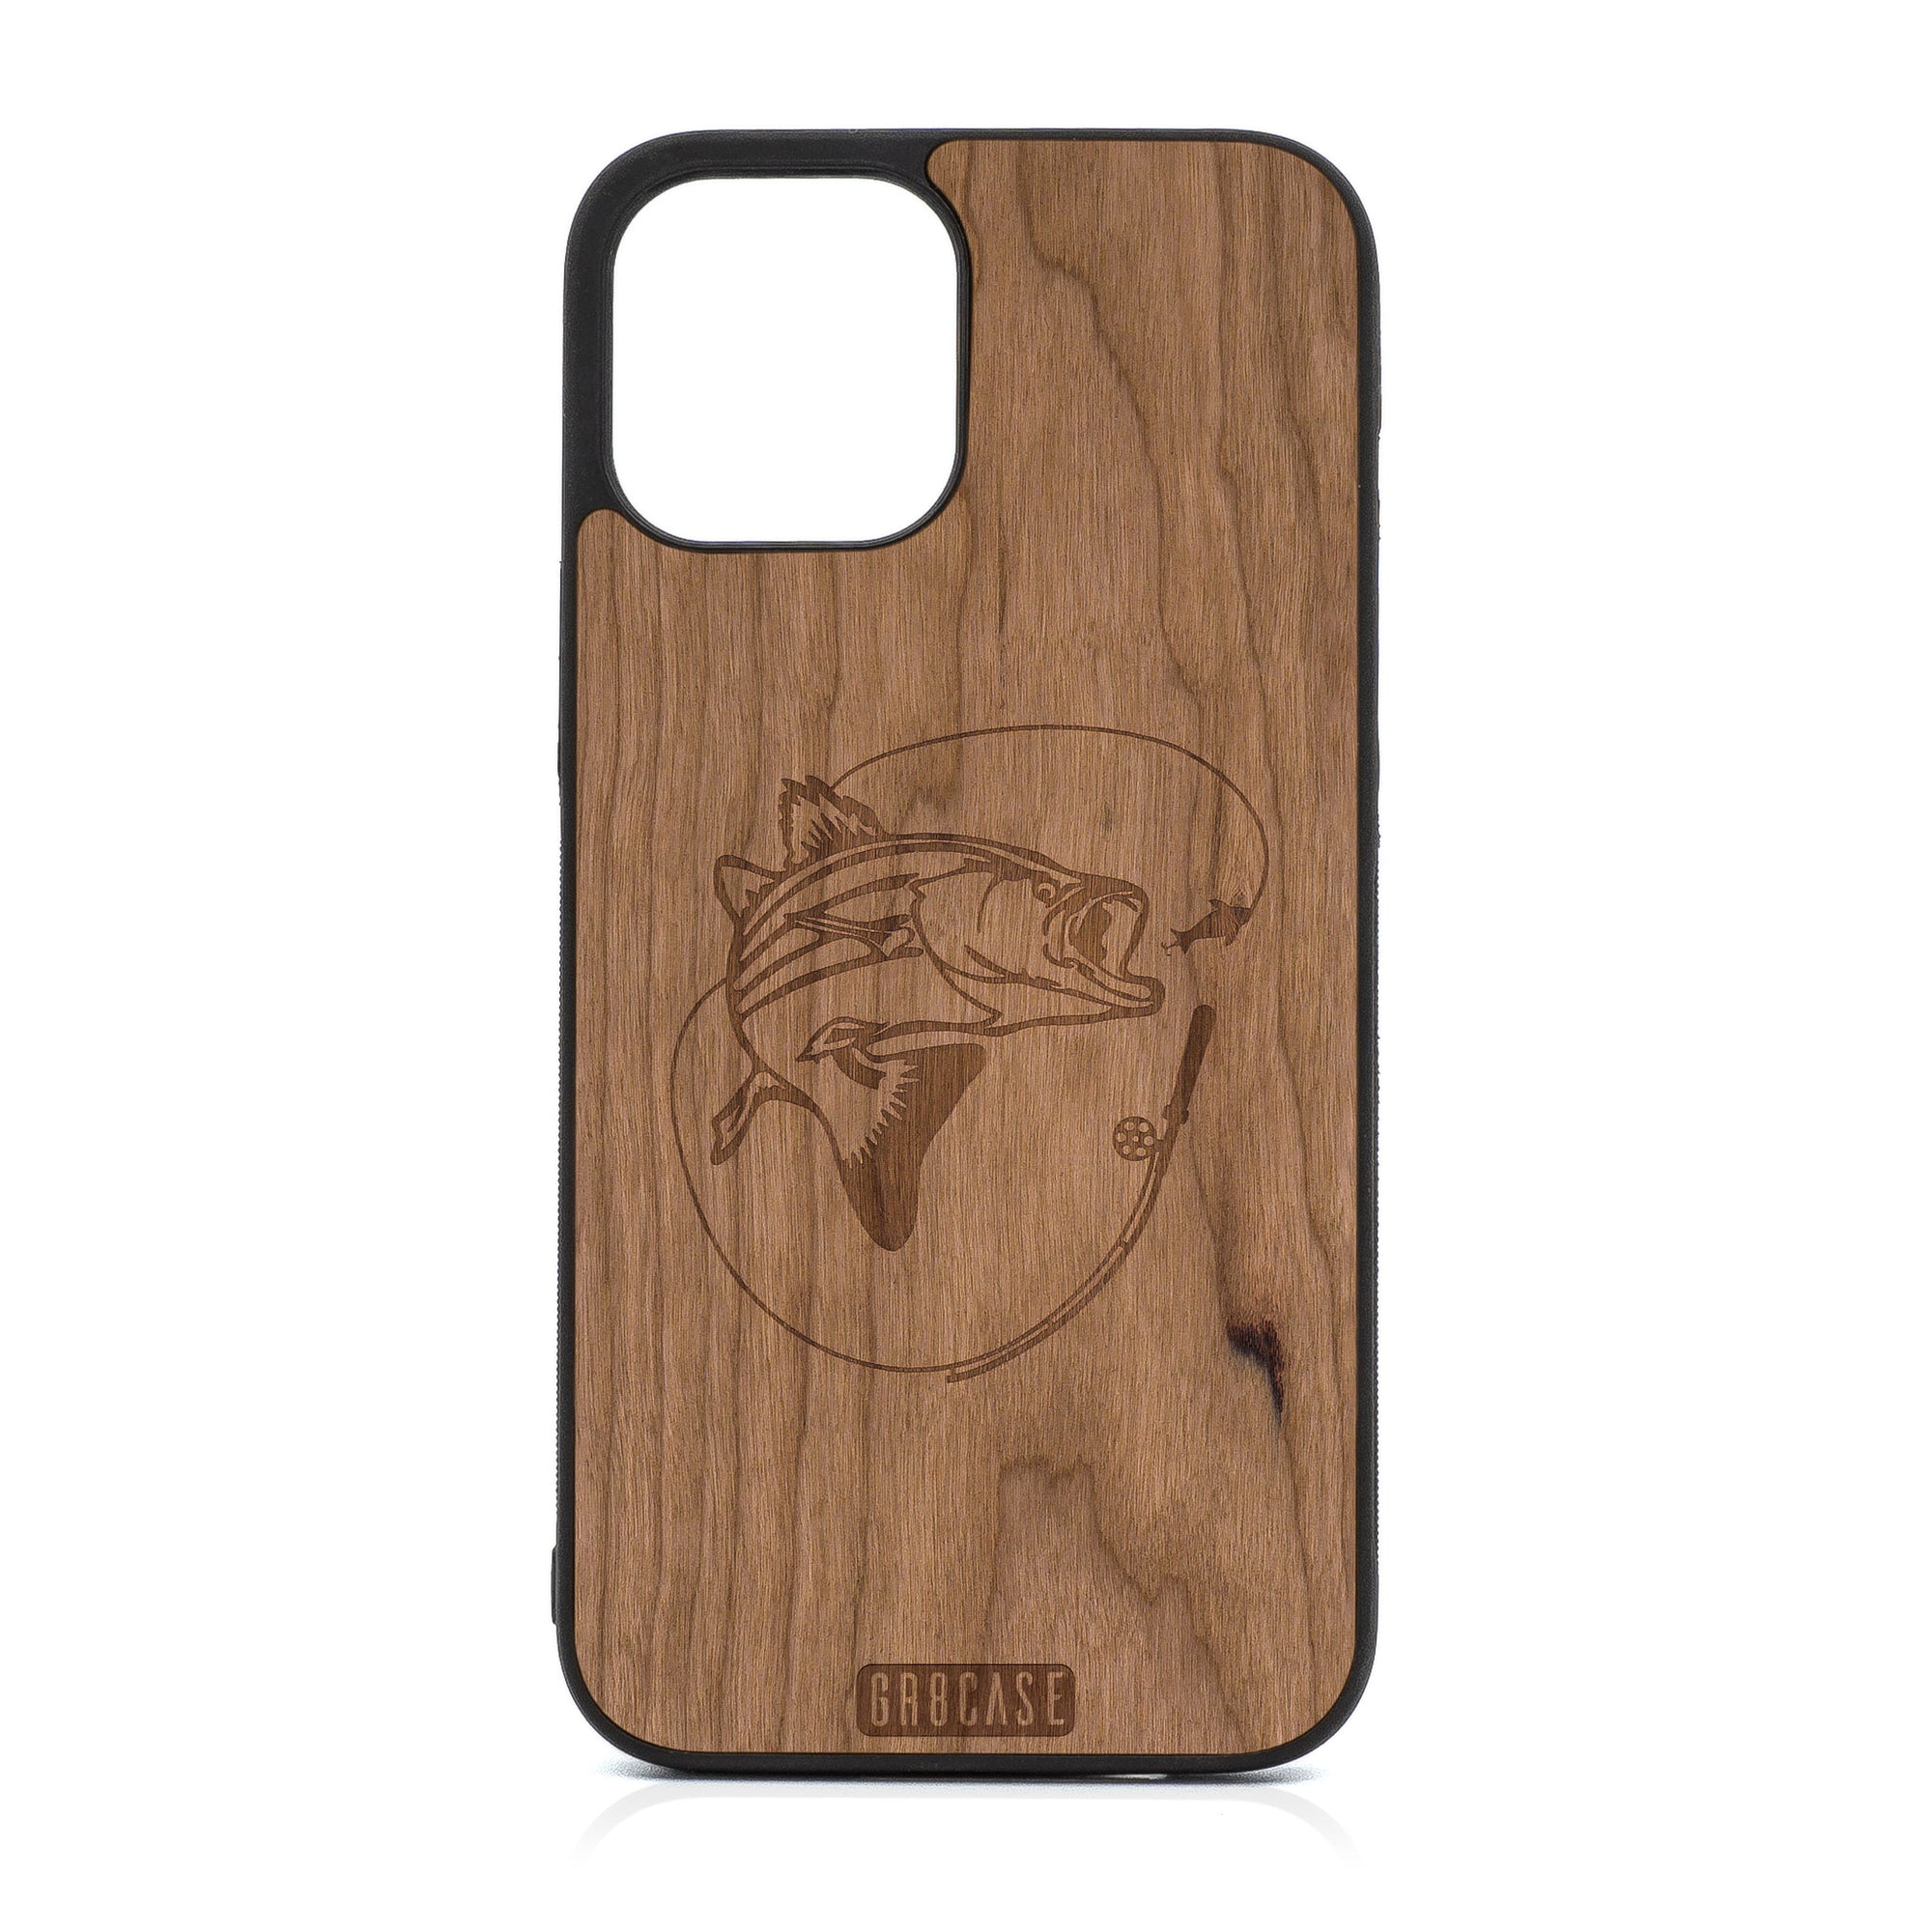 Fish and Reel Design Wood Case For iPhone 12 Pro Max